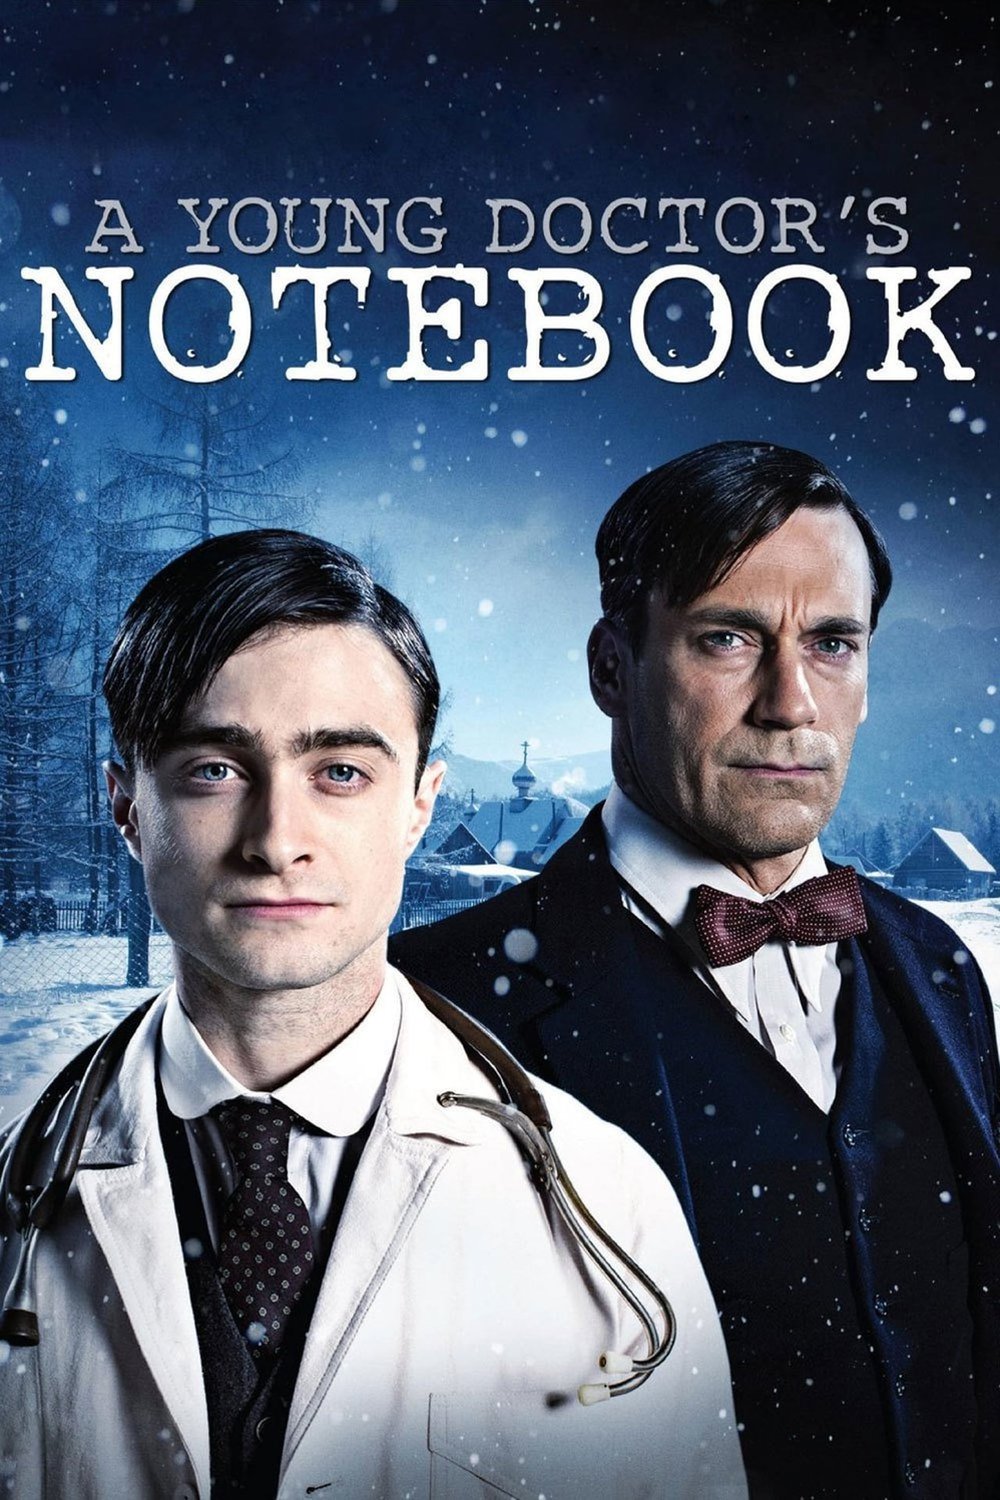 Poster of the movie A Young Doctor's Notebook